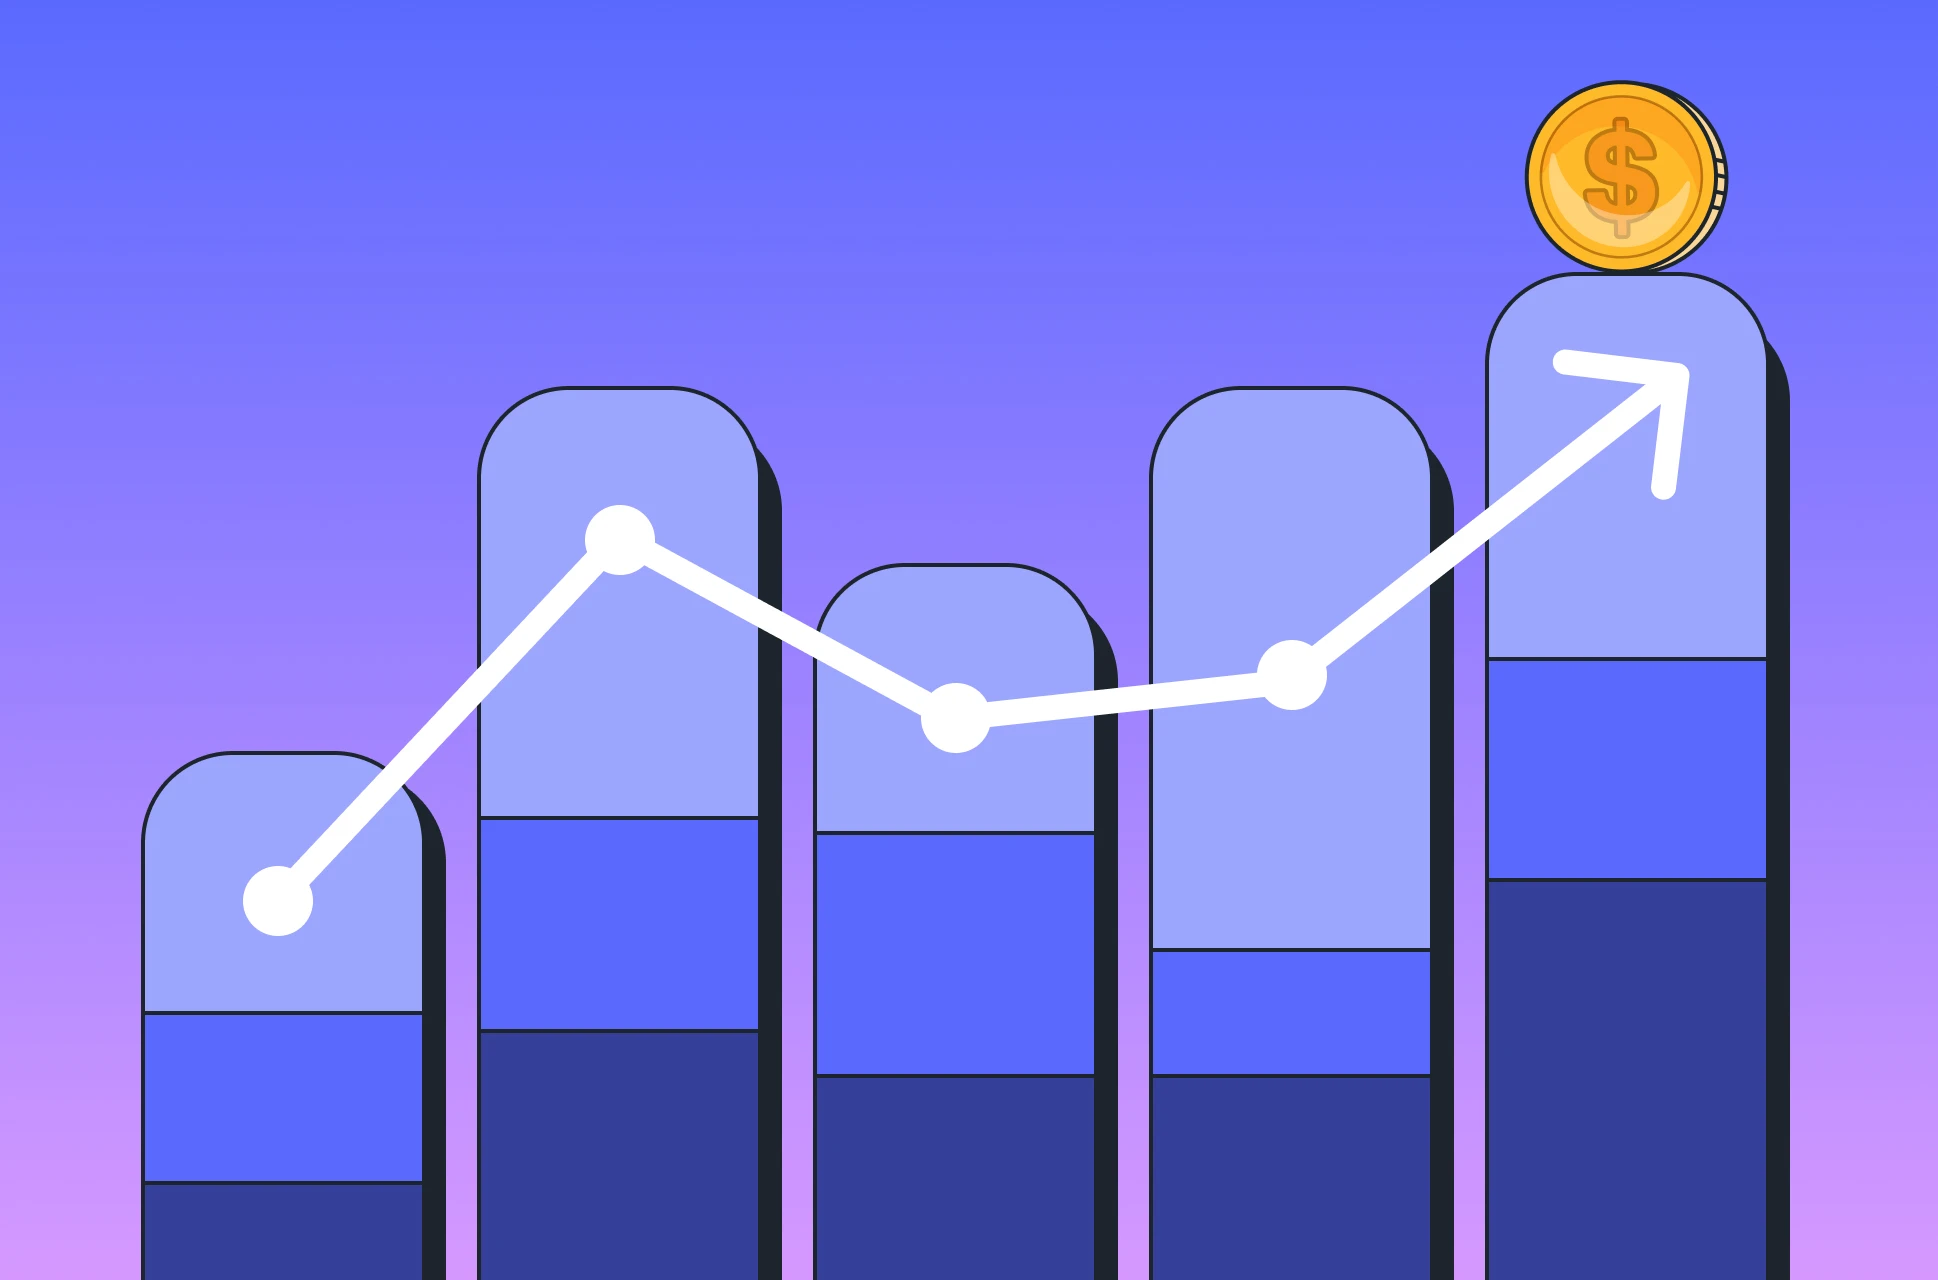 Purple design showing stock market gains trending upwards with bar graph and white line graph